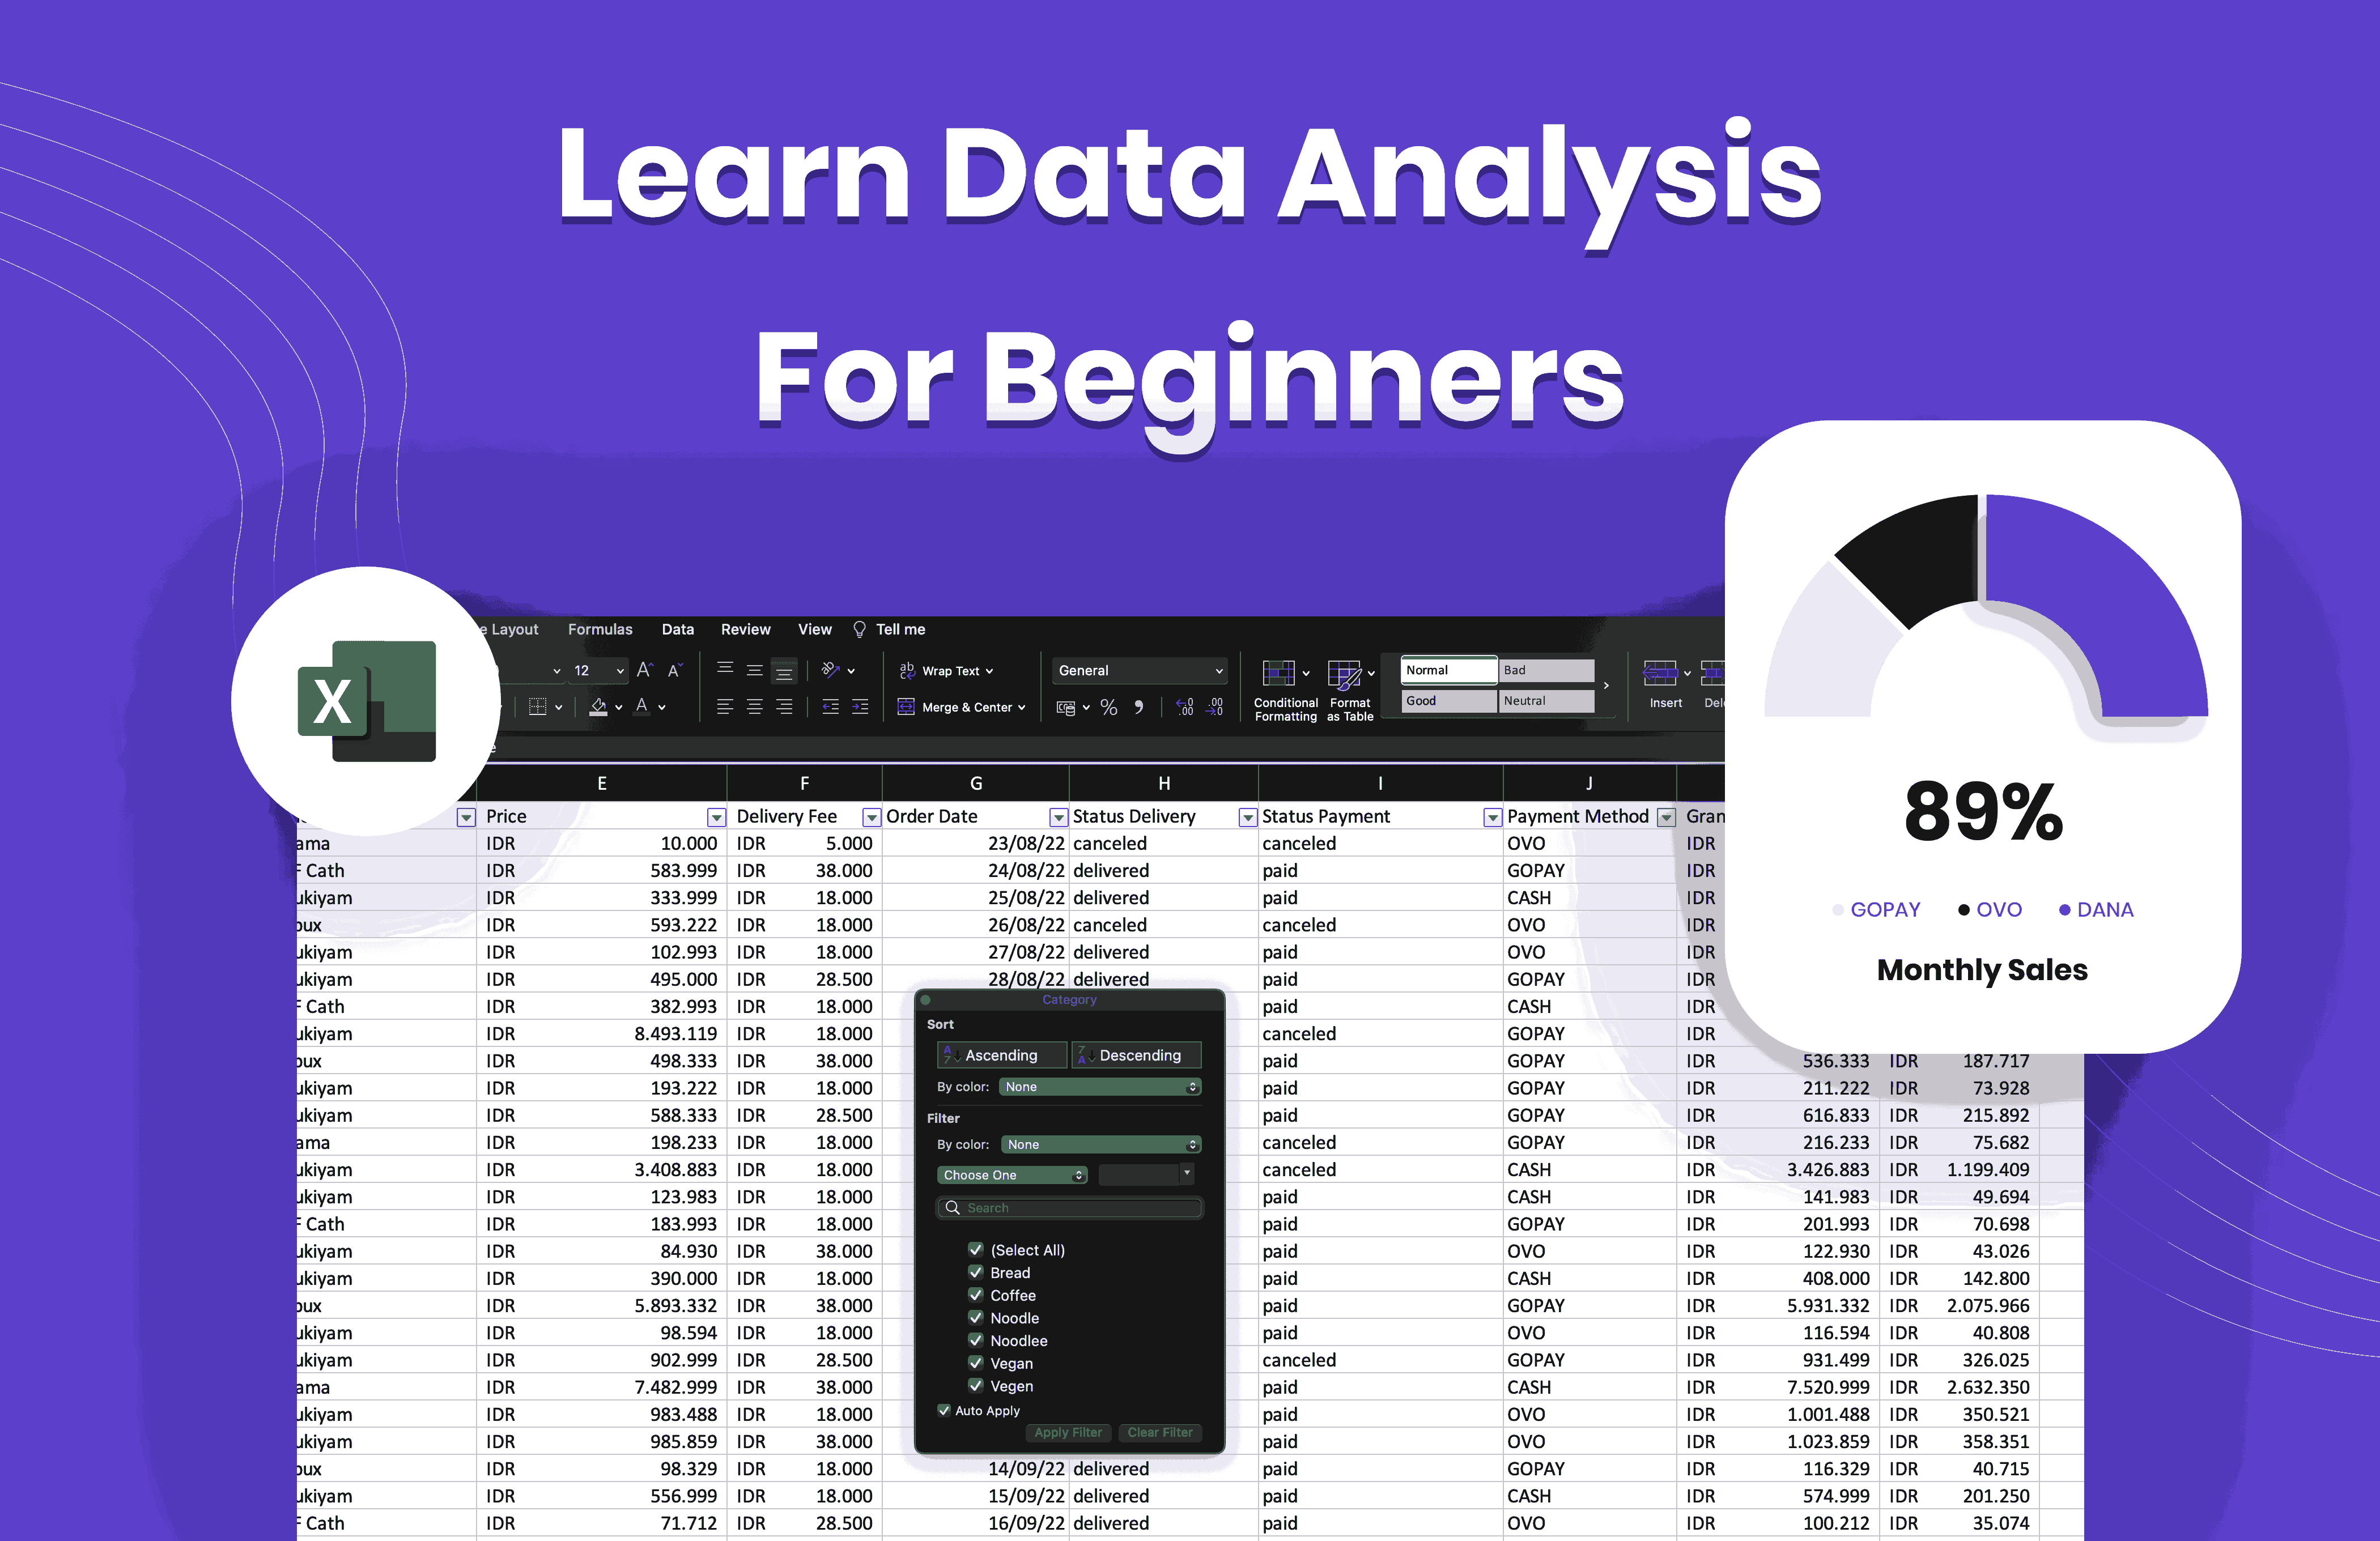 Learn Data Analysis For Beginners with Excel